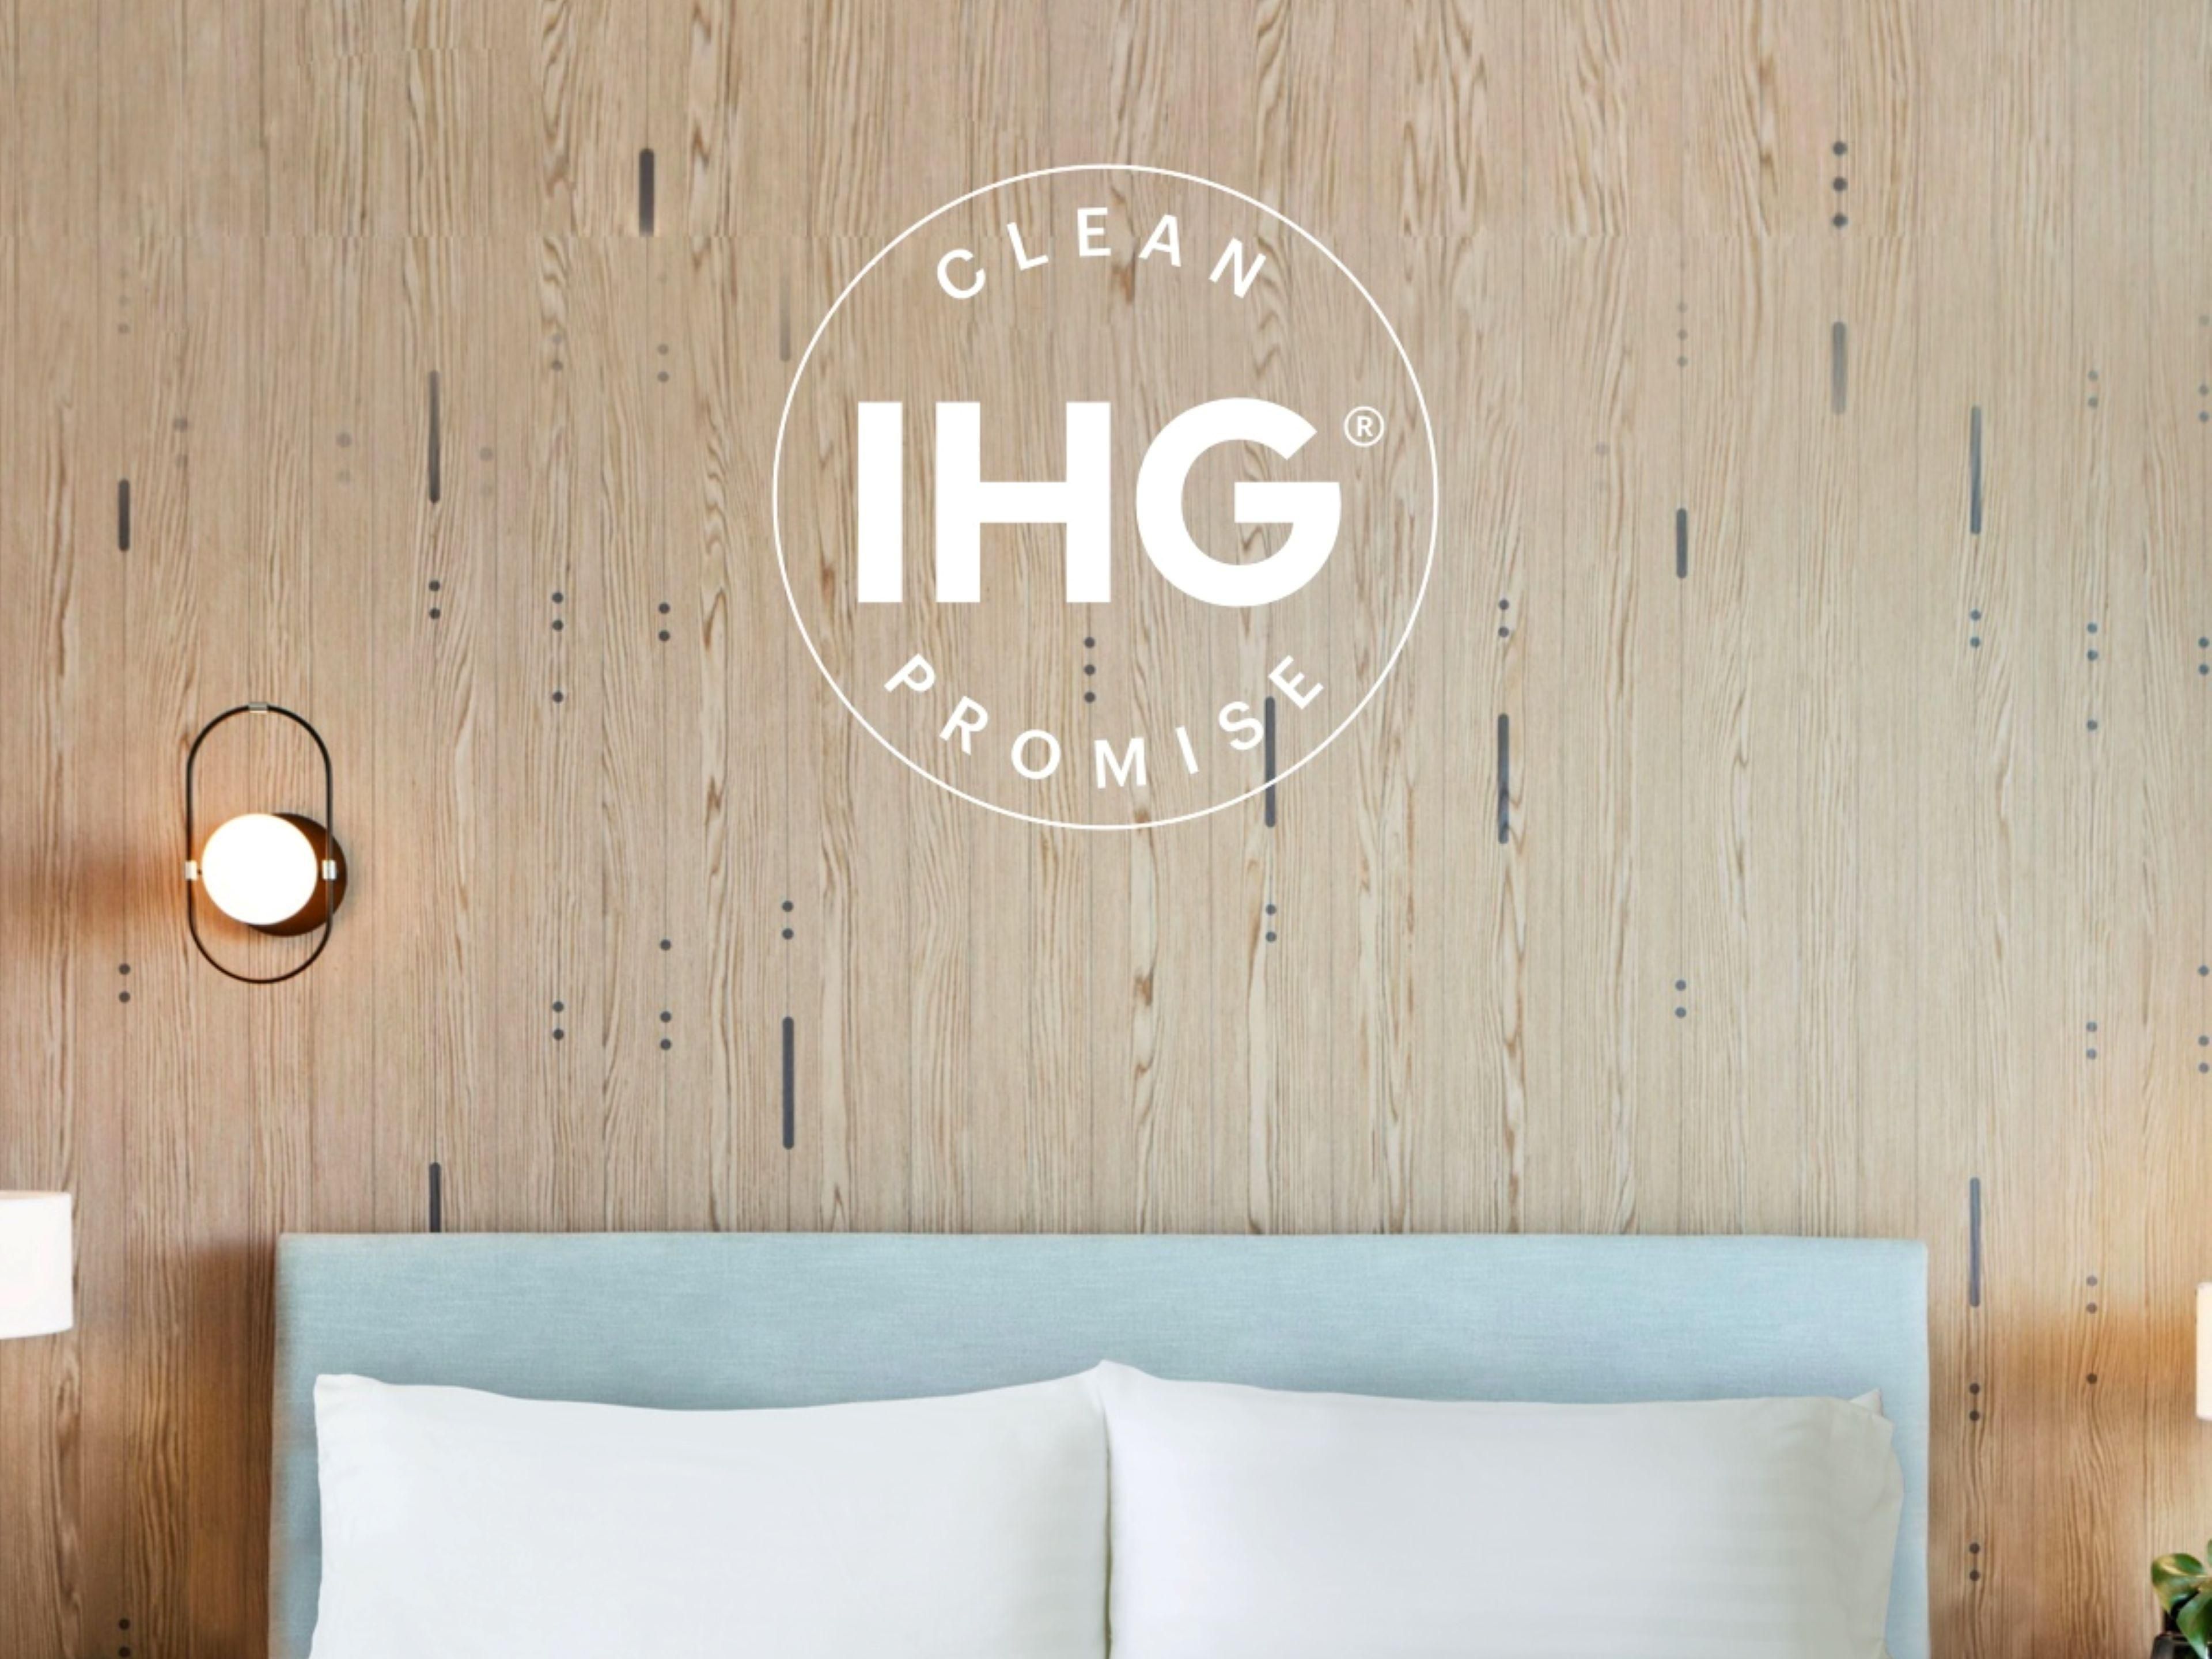 IHG has a long-standing commitment to rigorous cleaning procedures.  This IHG Way of Clean program is now being expanded with additional COVID-19 protocols and best practices. 